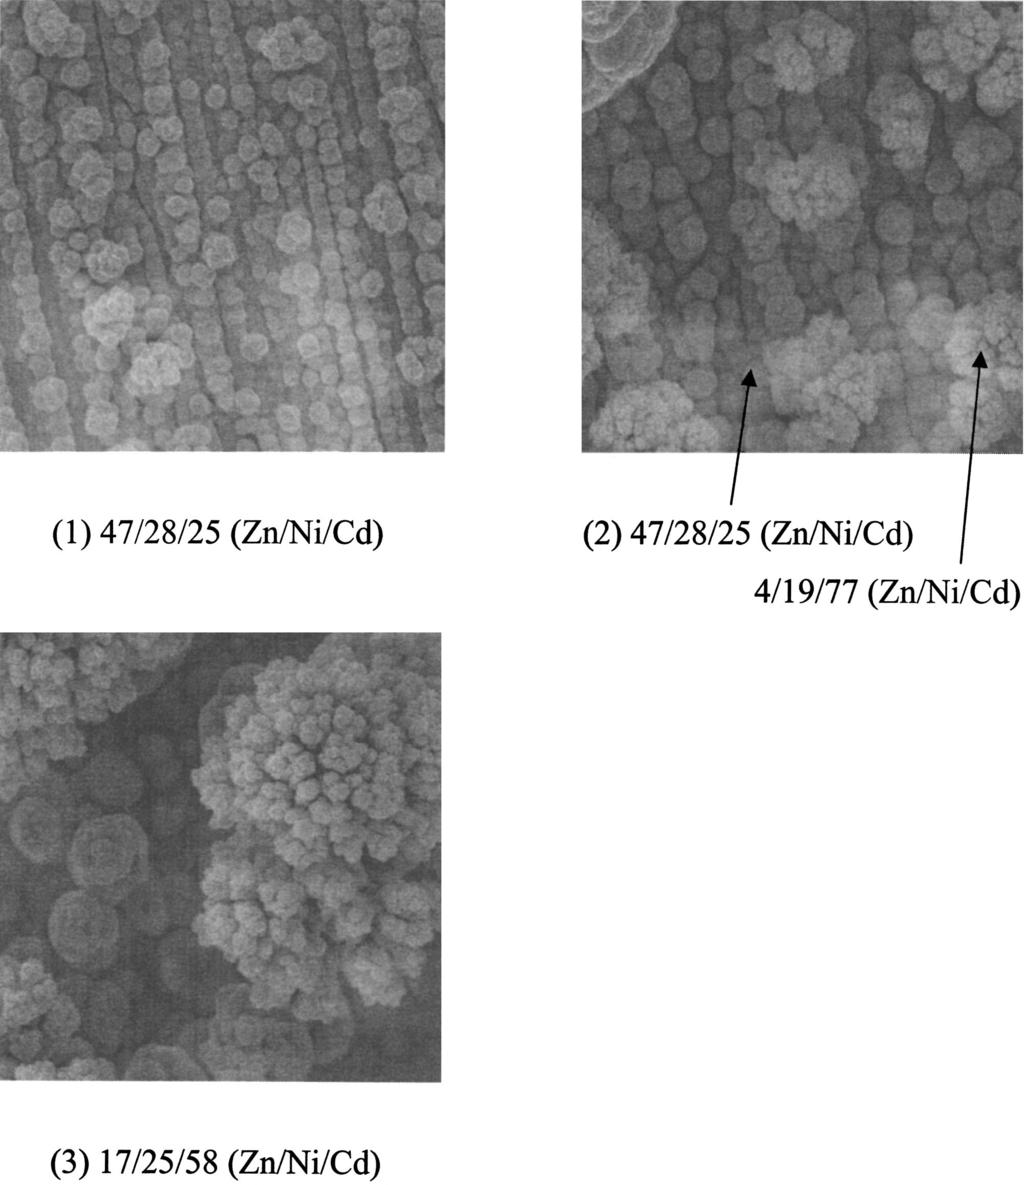 Journal of The Electrochemical Society, 150 2 C81-C88 2003 C87 Figure 10. Surface morphology and composition analysis corresponding to three distinct points depicted in Fig. 9.